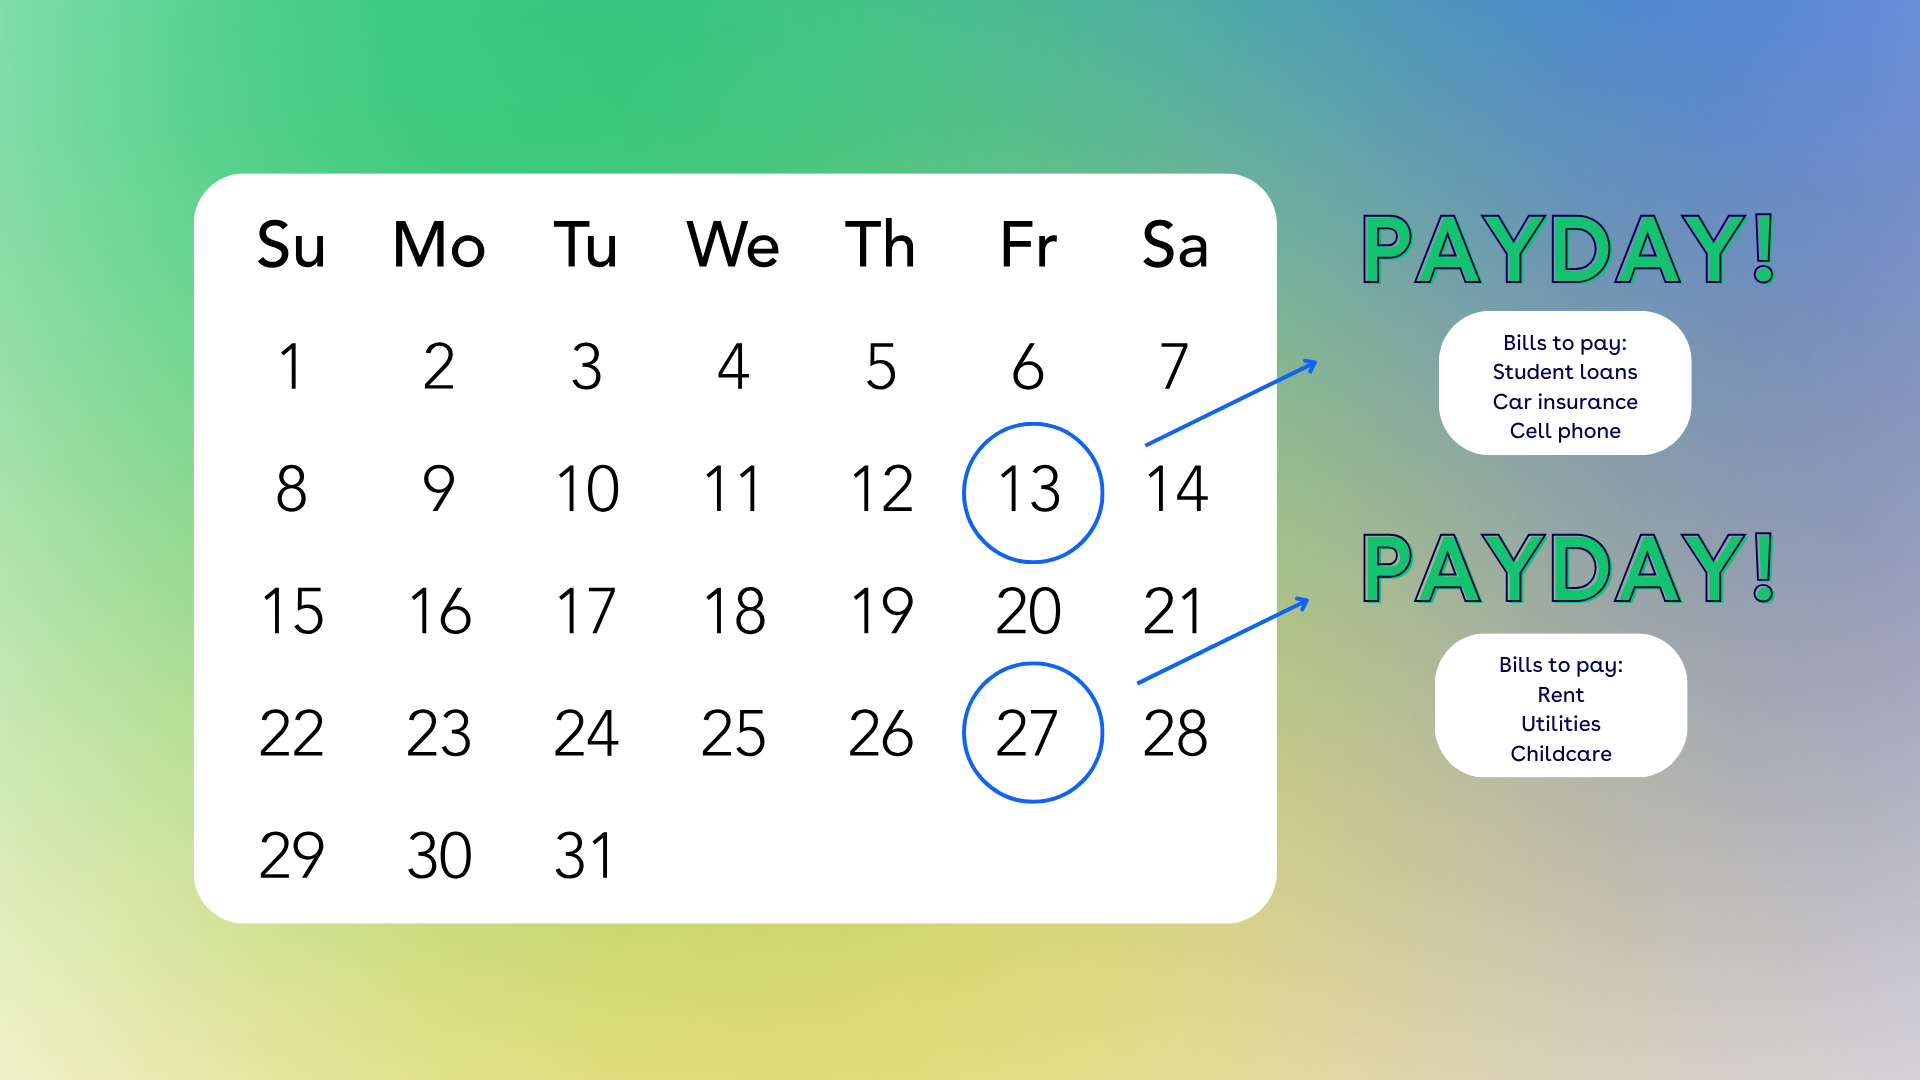 Image showing a calendar with two Friday dates circled with the word "Payday!" next to it; under the first payday it lists the bills to pay as student loans, car insurance, cell phone and under the second payday it lists the bills to pay as rent, utilities, and childcare as a way to help people better track bills